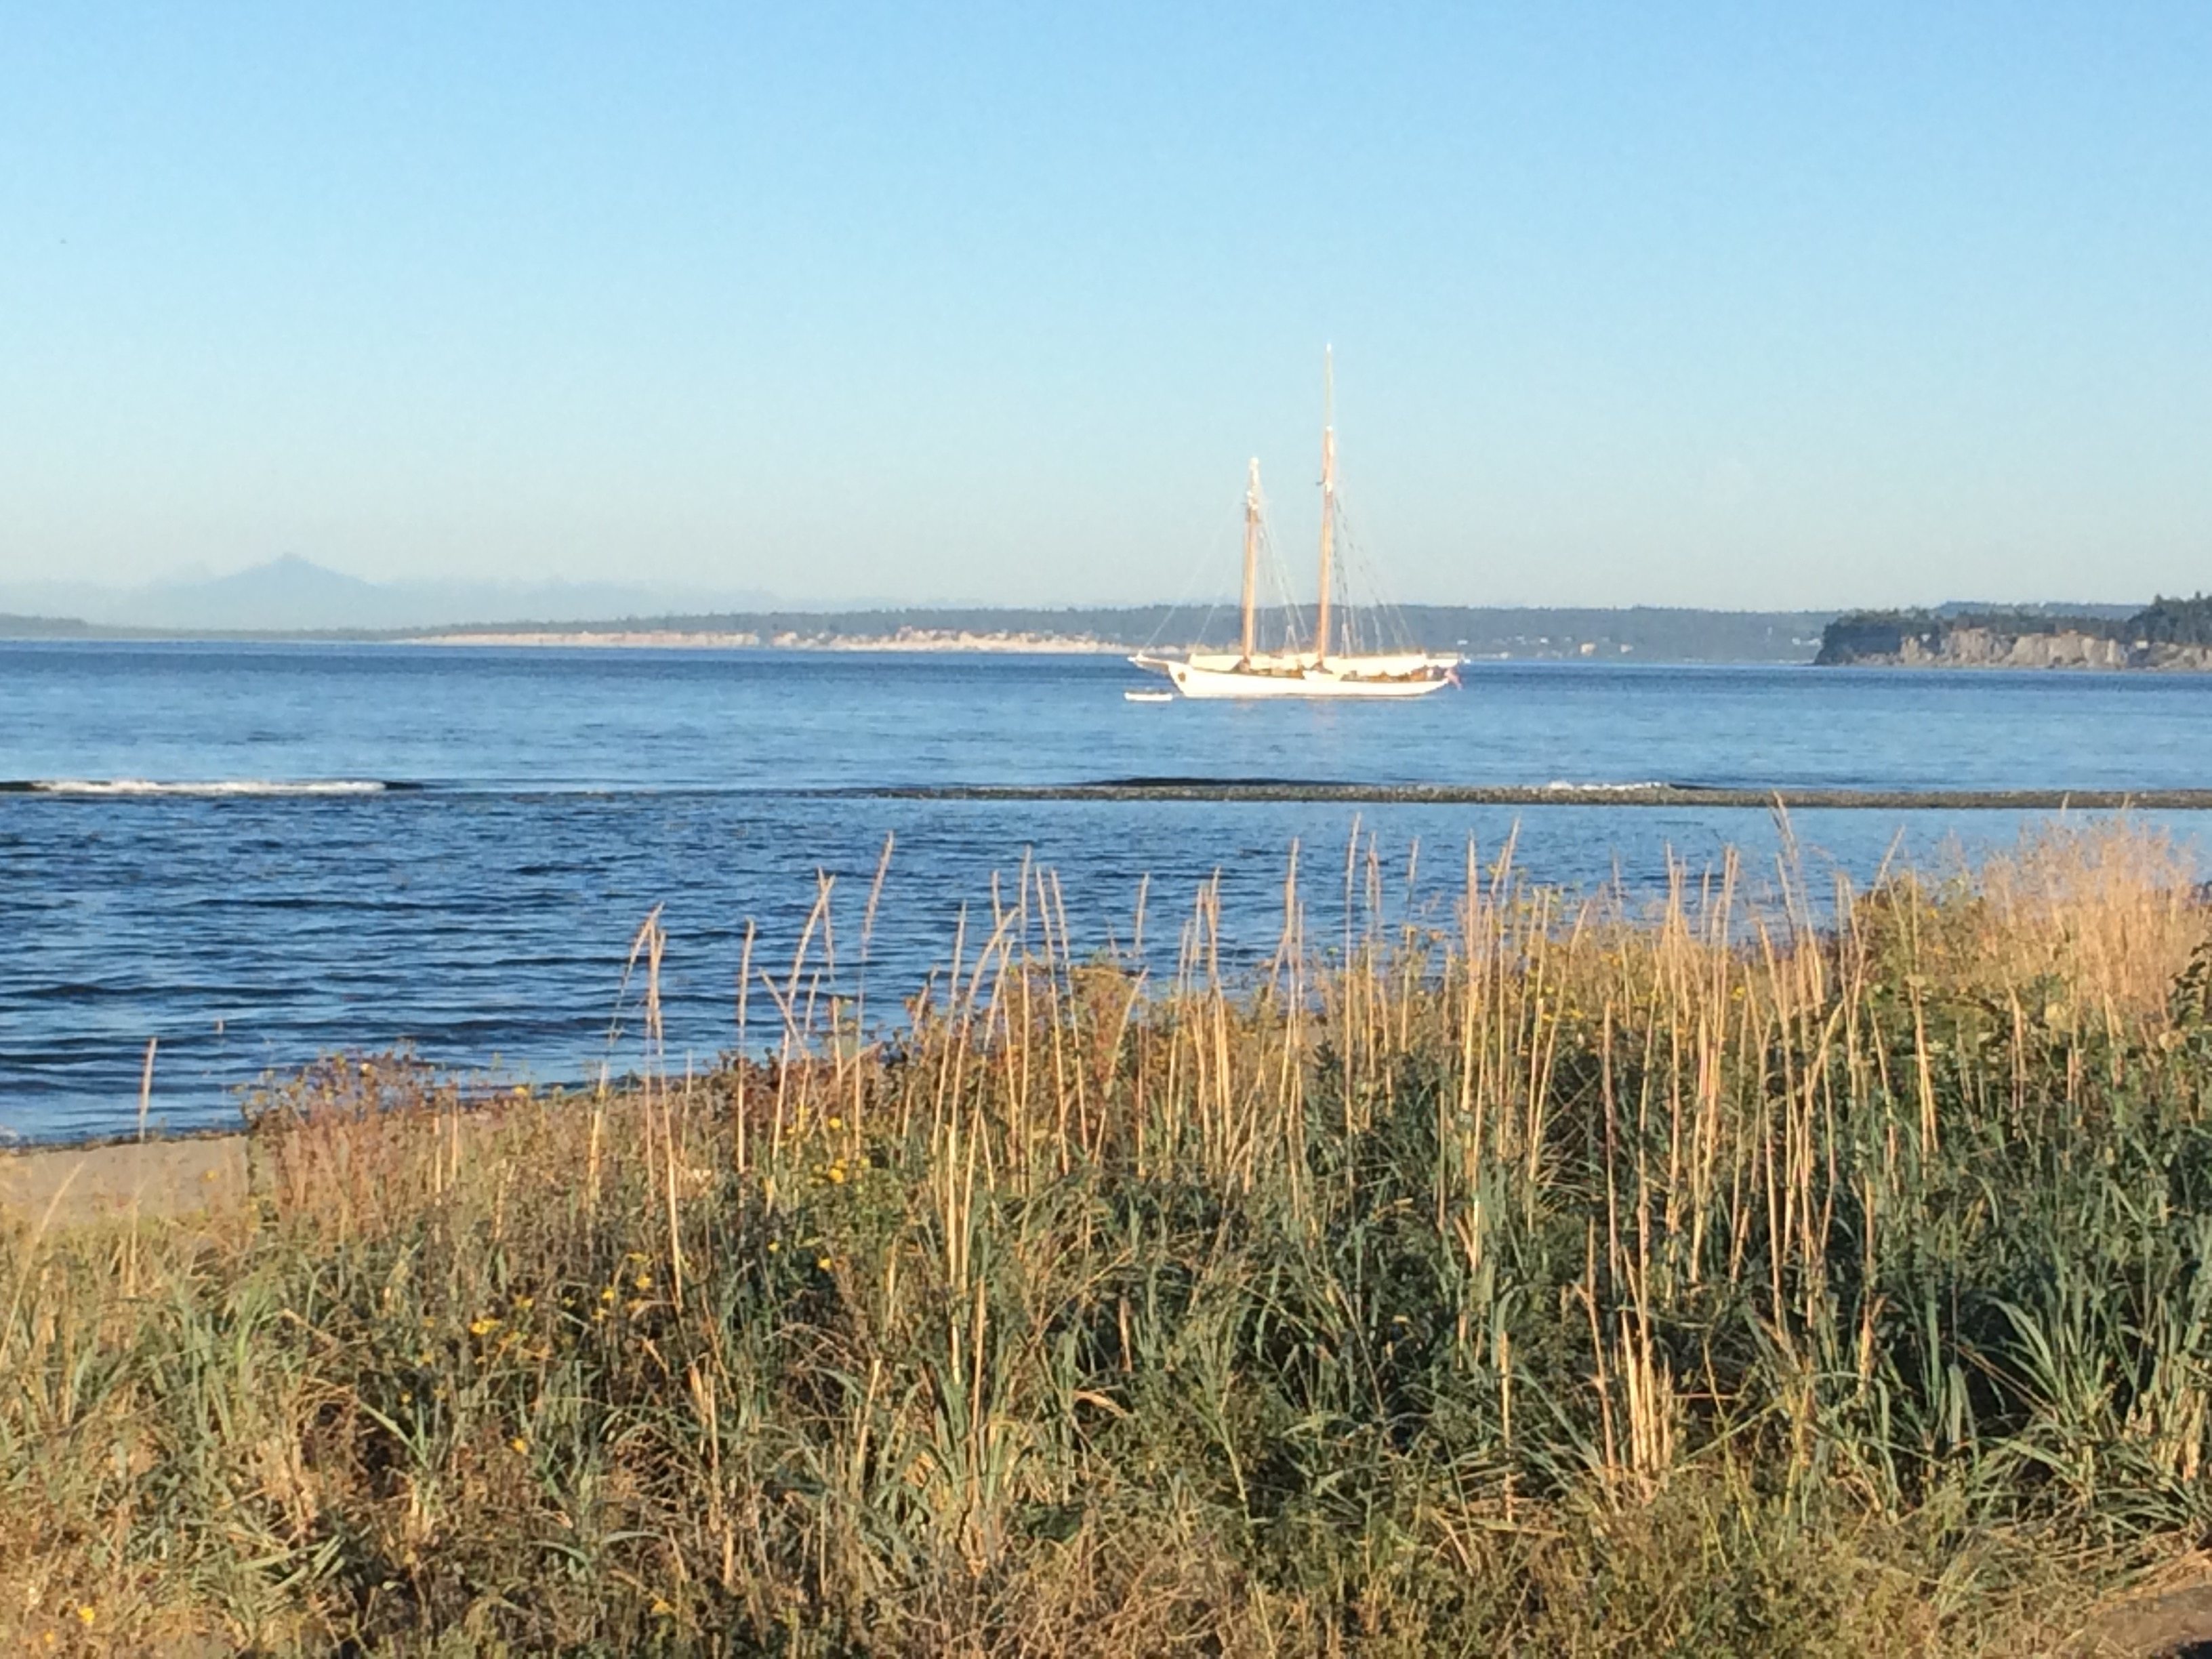 View from one of the many Port Townsend beaches